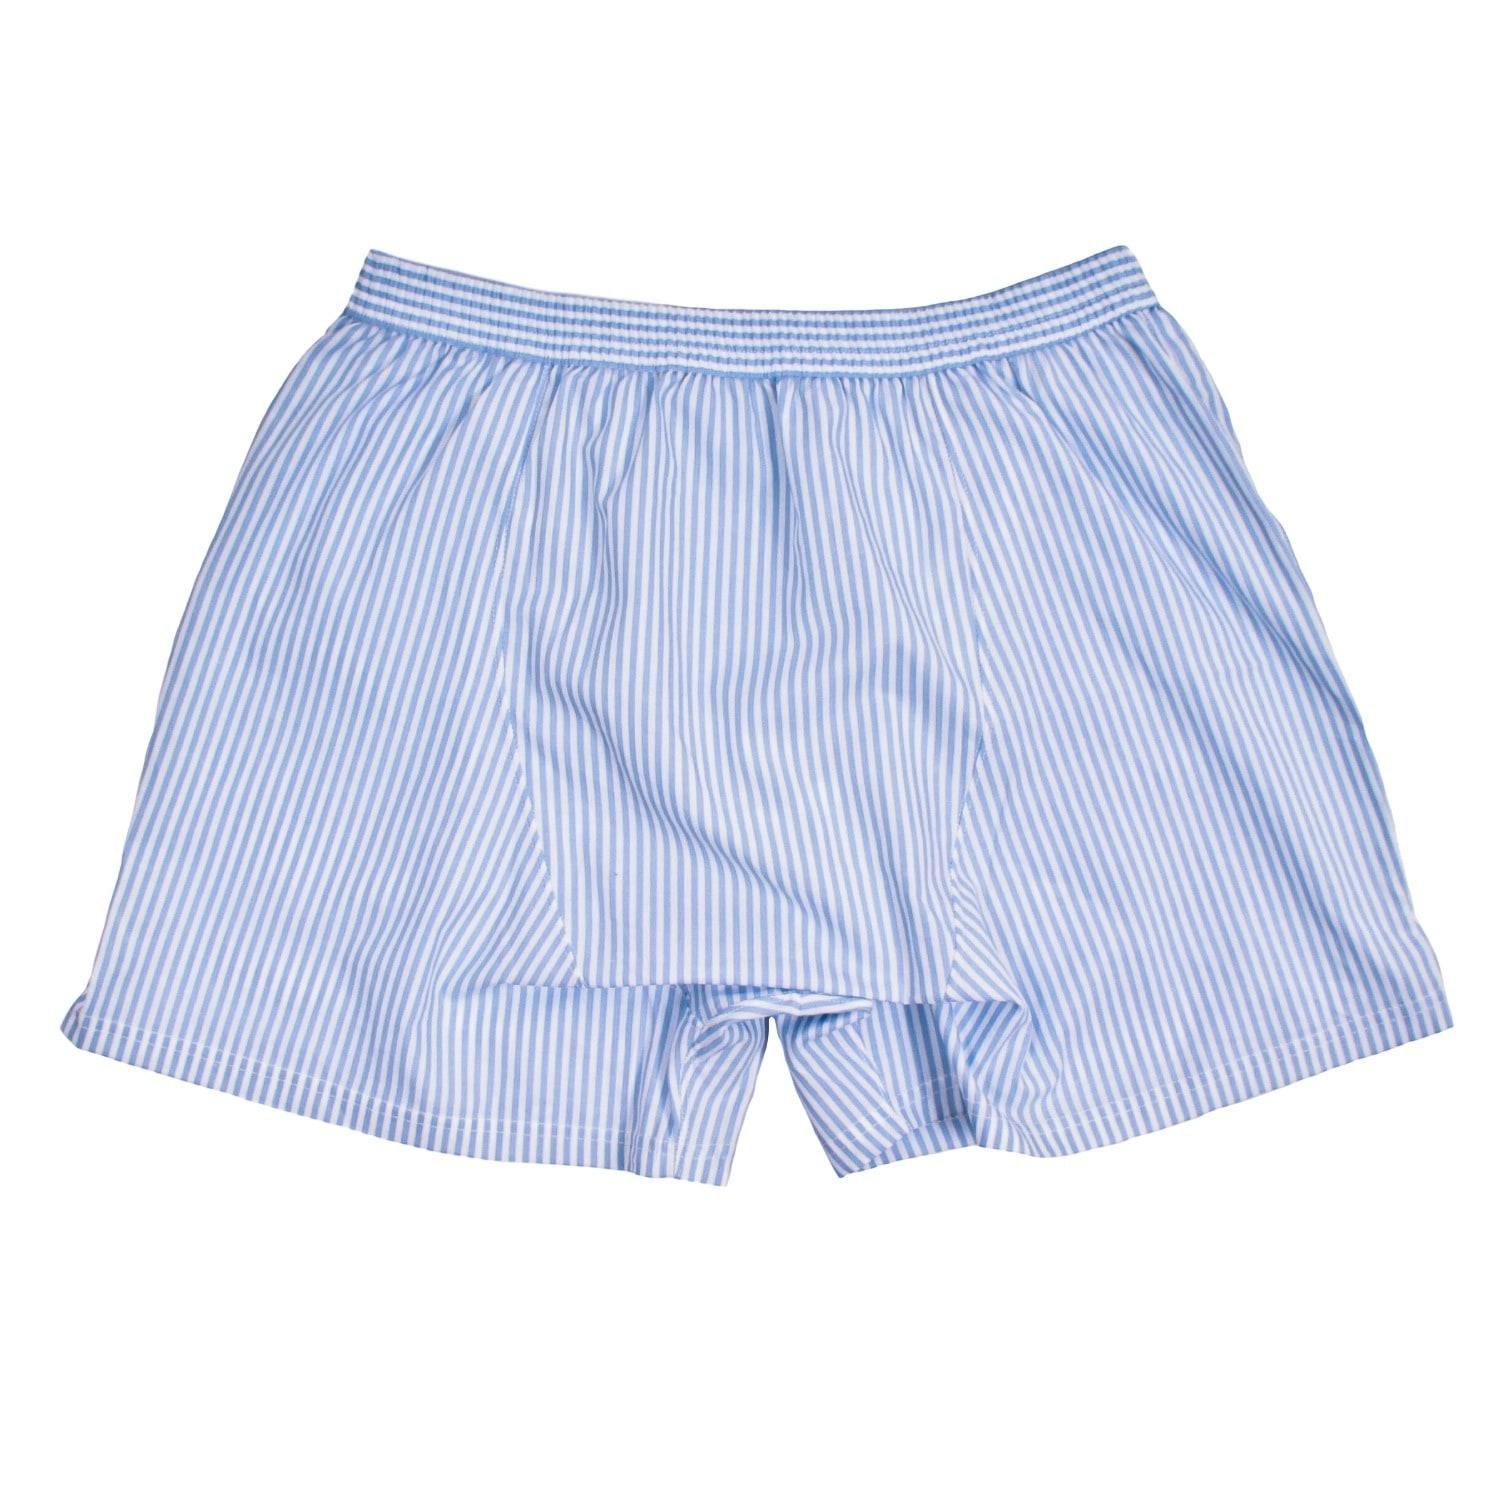 KLOTERS MILANO Light Blue Striped Boxer Shorts in Blue for Men - Lyst